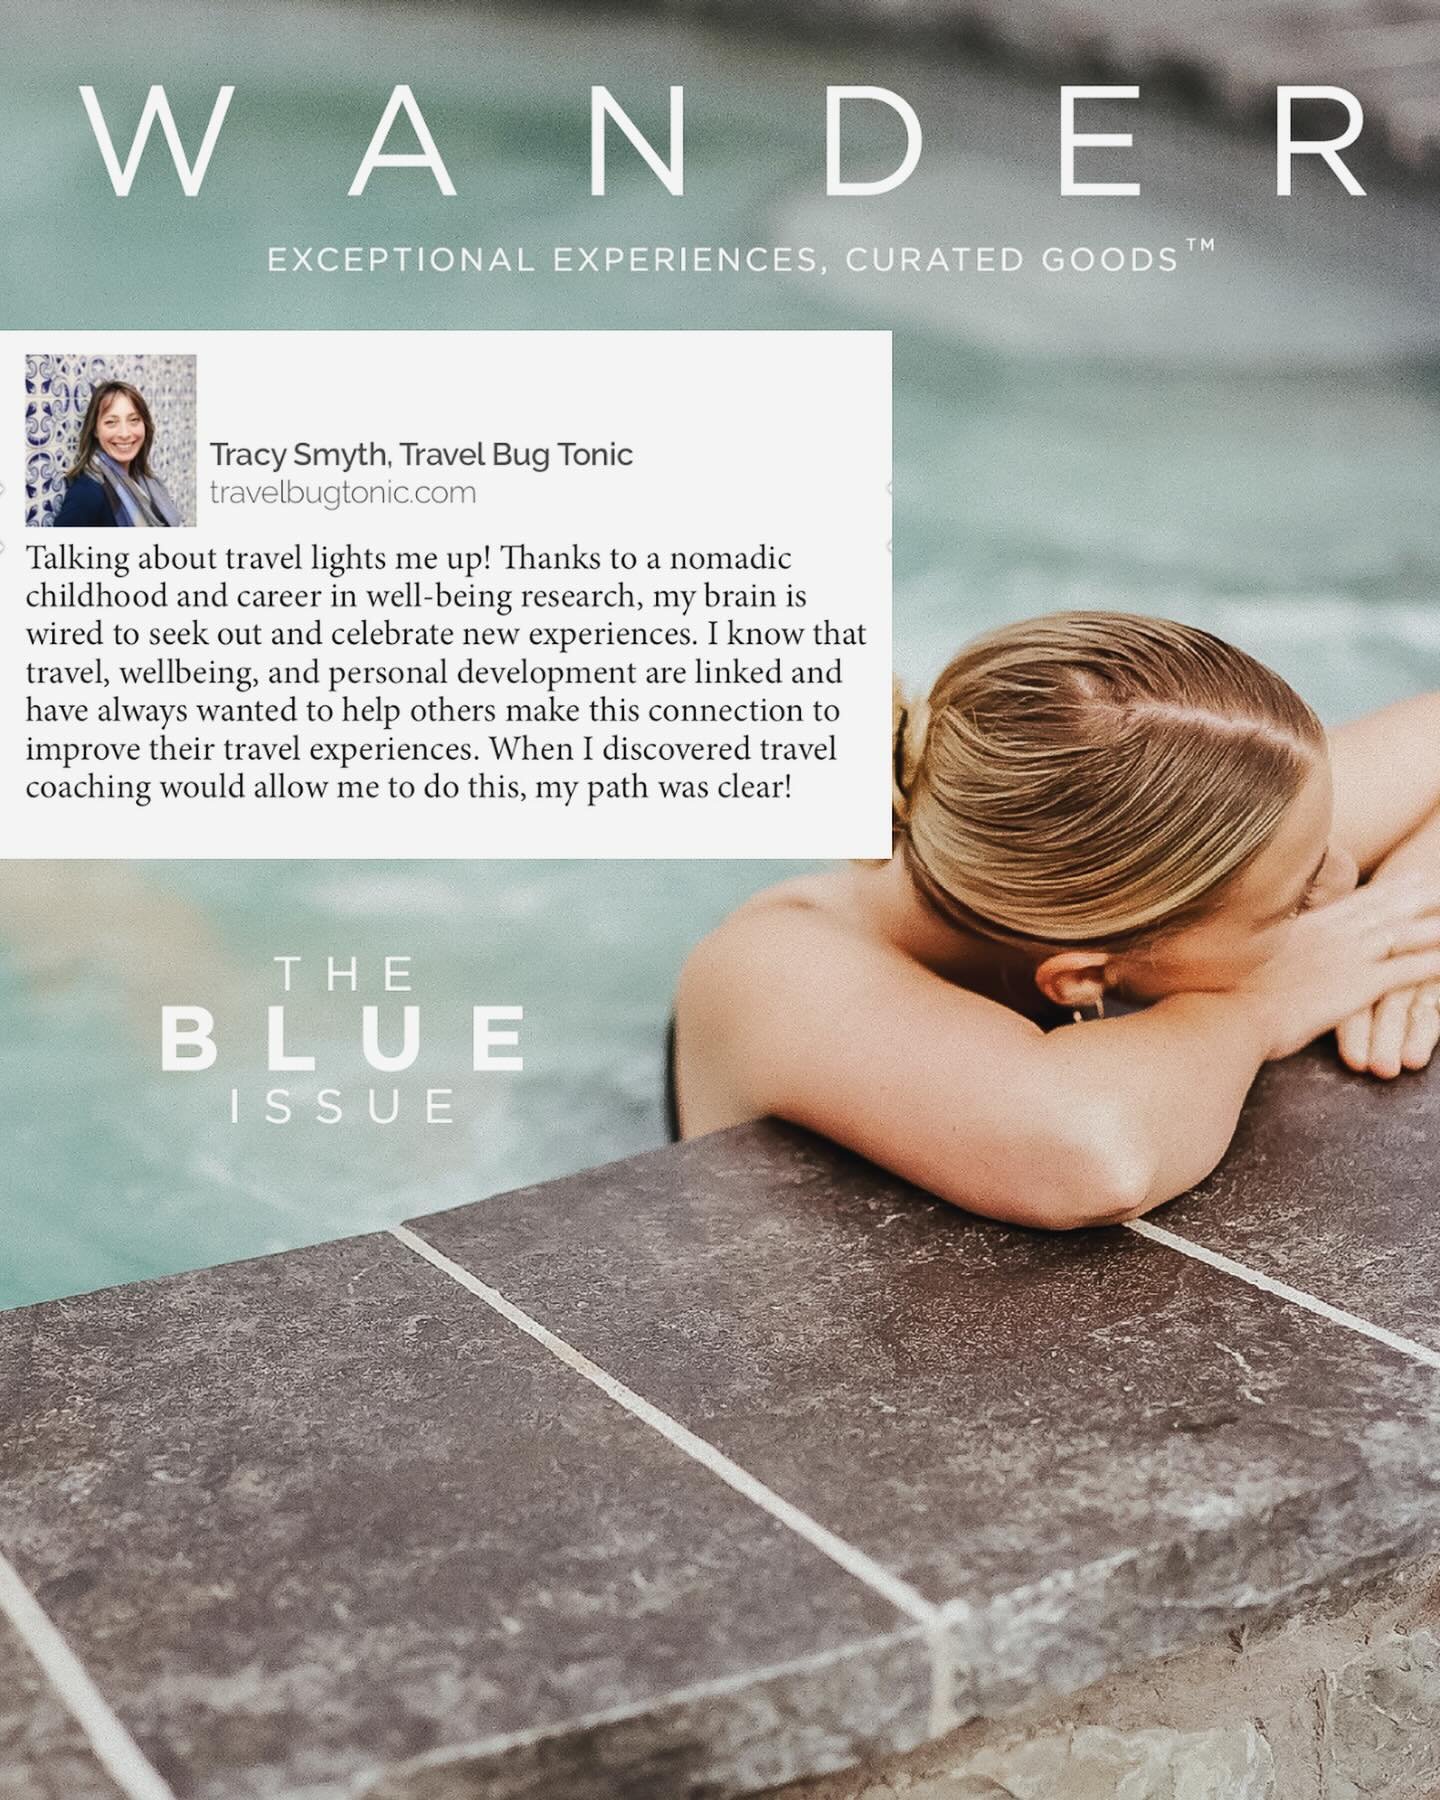 Thrilled to have a wee feature in Wander magazine! An incredibly beautiful magazine that celebrates what I cherish: travel and well-being. 
💚
Grateful for the opportunity as a certified Travel Coach through @thetravelcoachnetwork 
.
Check out all th